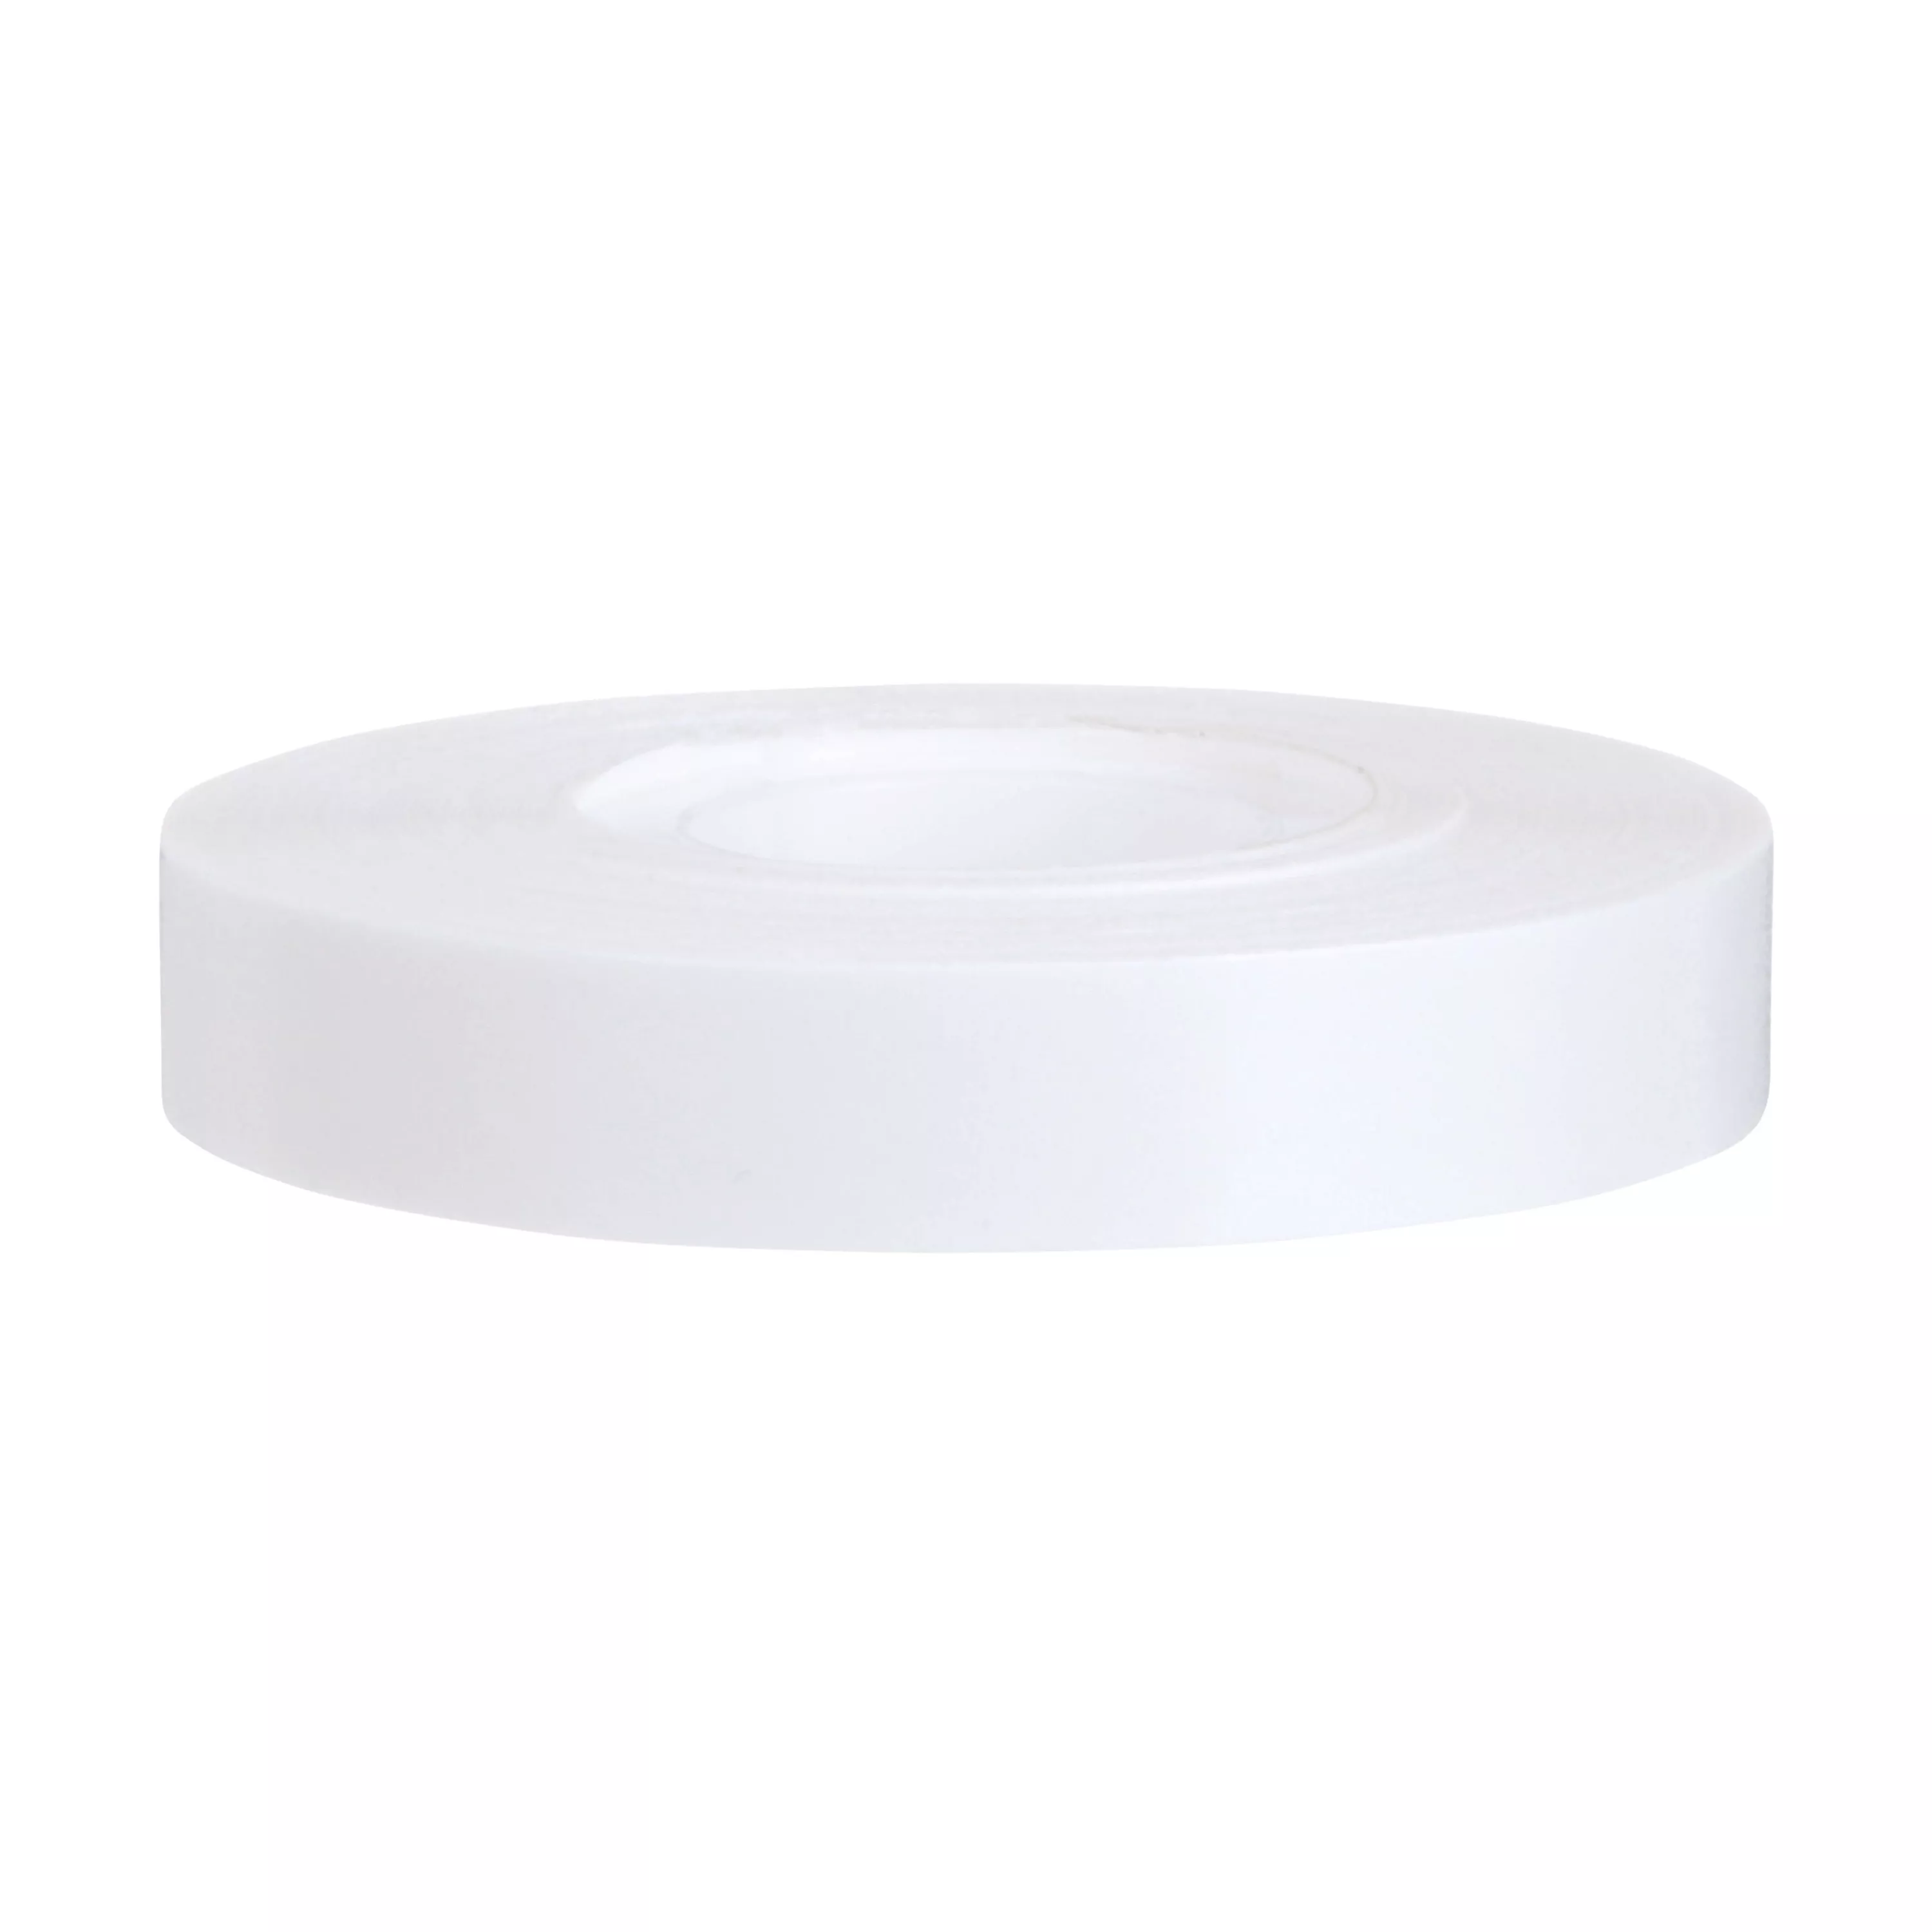 SKU 7000028874 | Scotch® ATG Repositionable Double Coated Tissue Tape 928